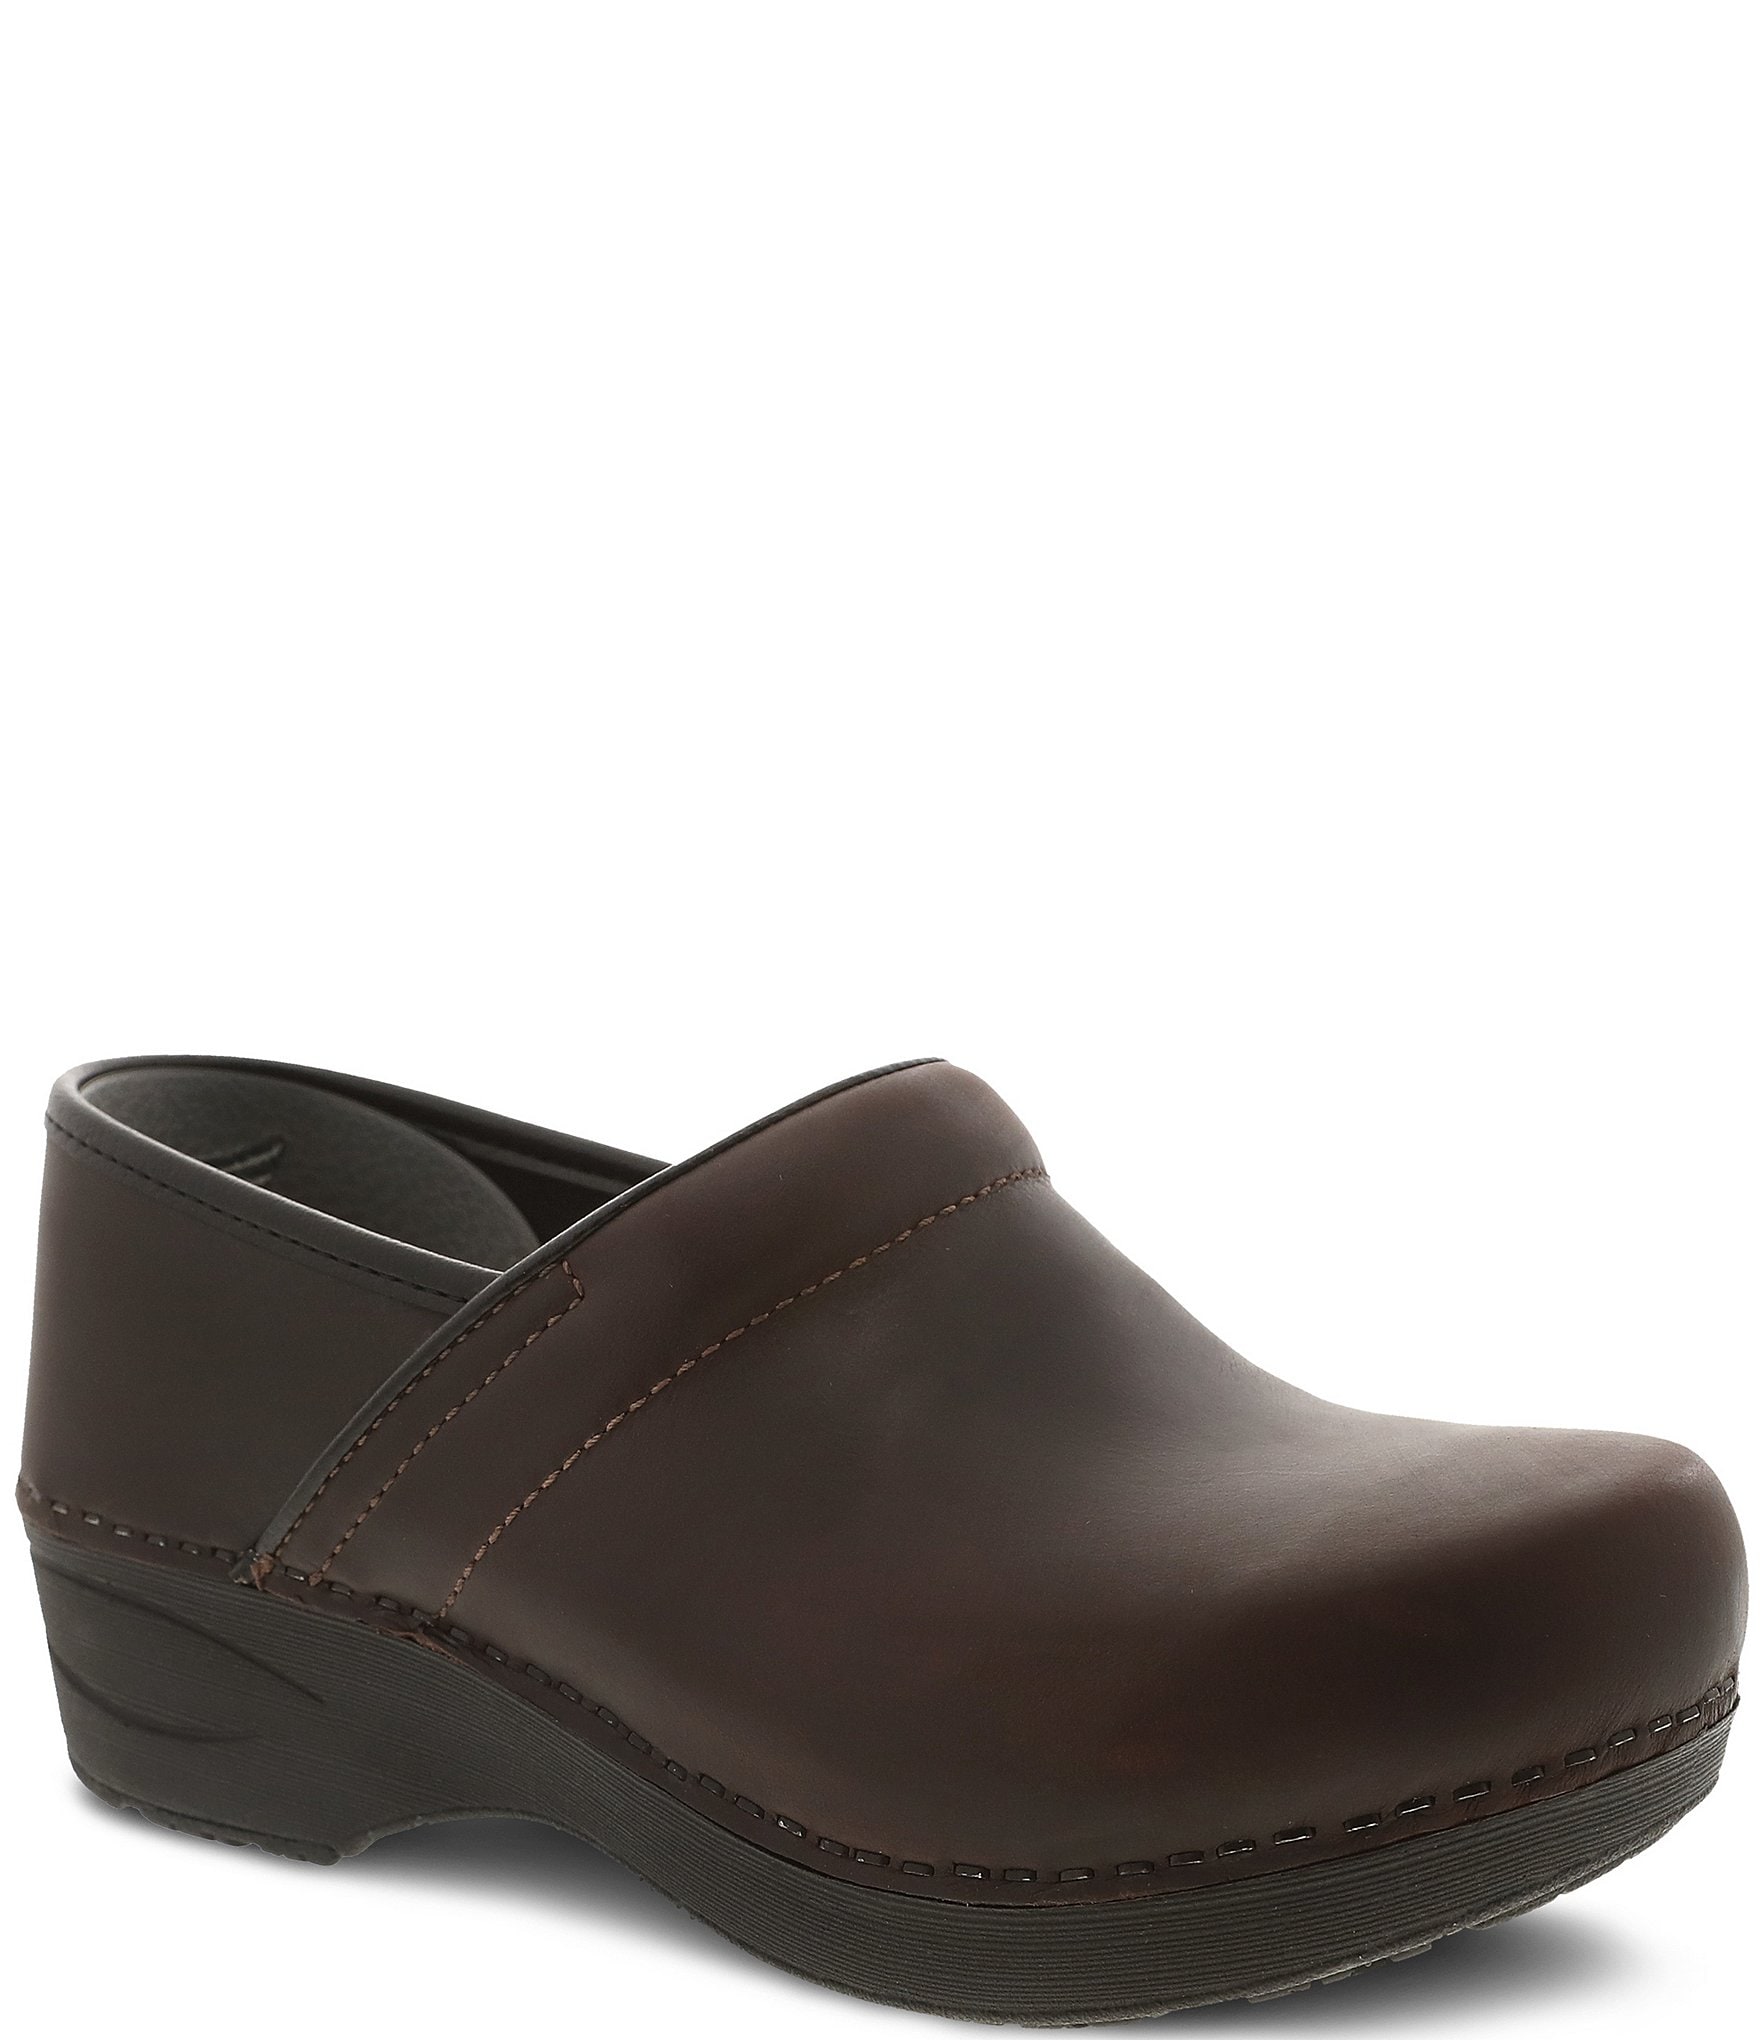 womens brown leather clogs